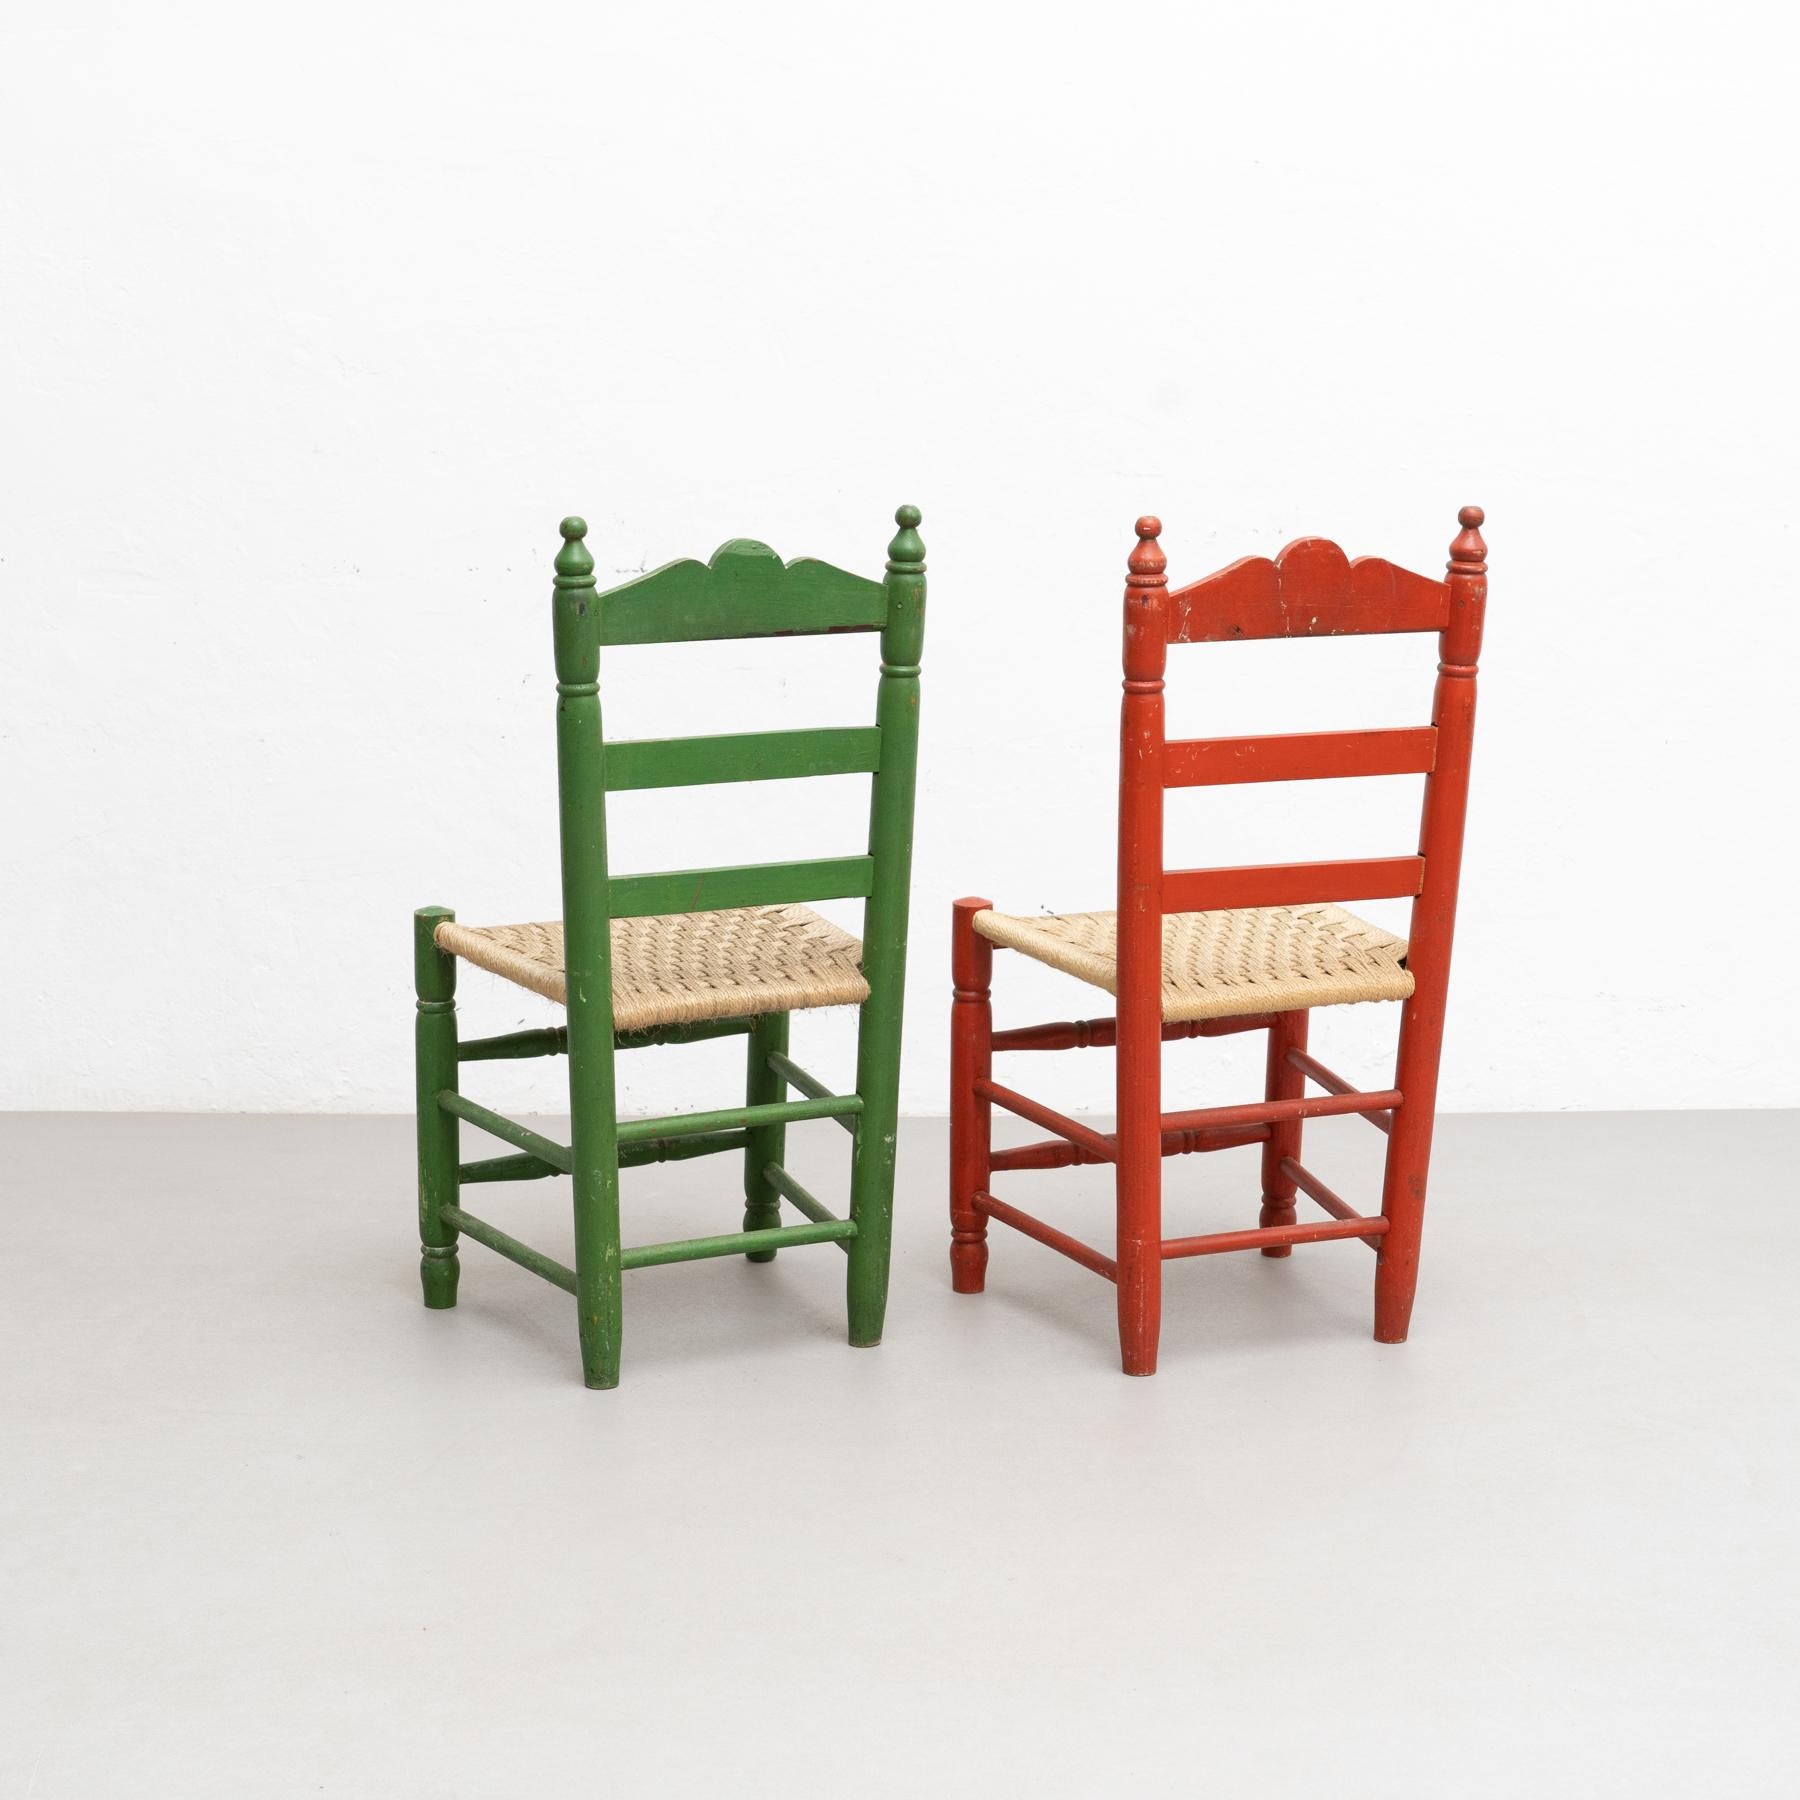 Mid-20th Century Set of Two Rustic Traditional Hand-Painted Wood Chairs, circa 1940